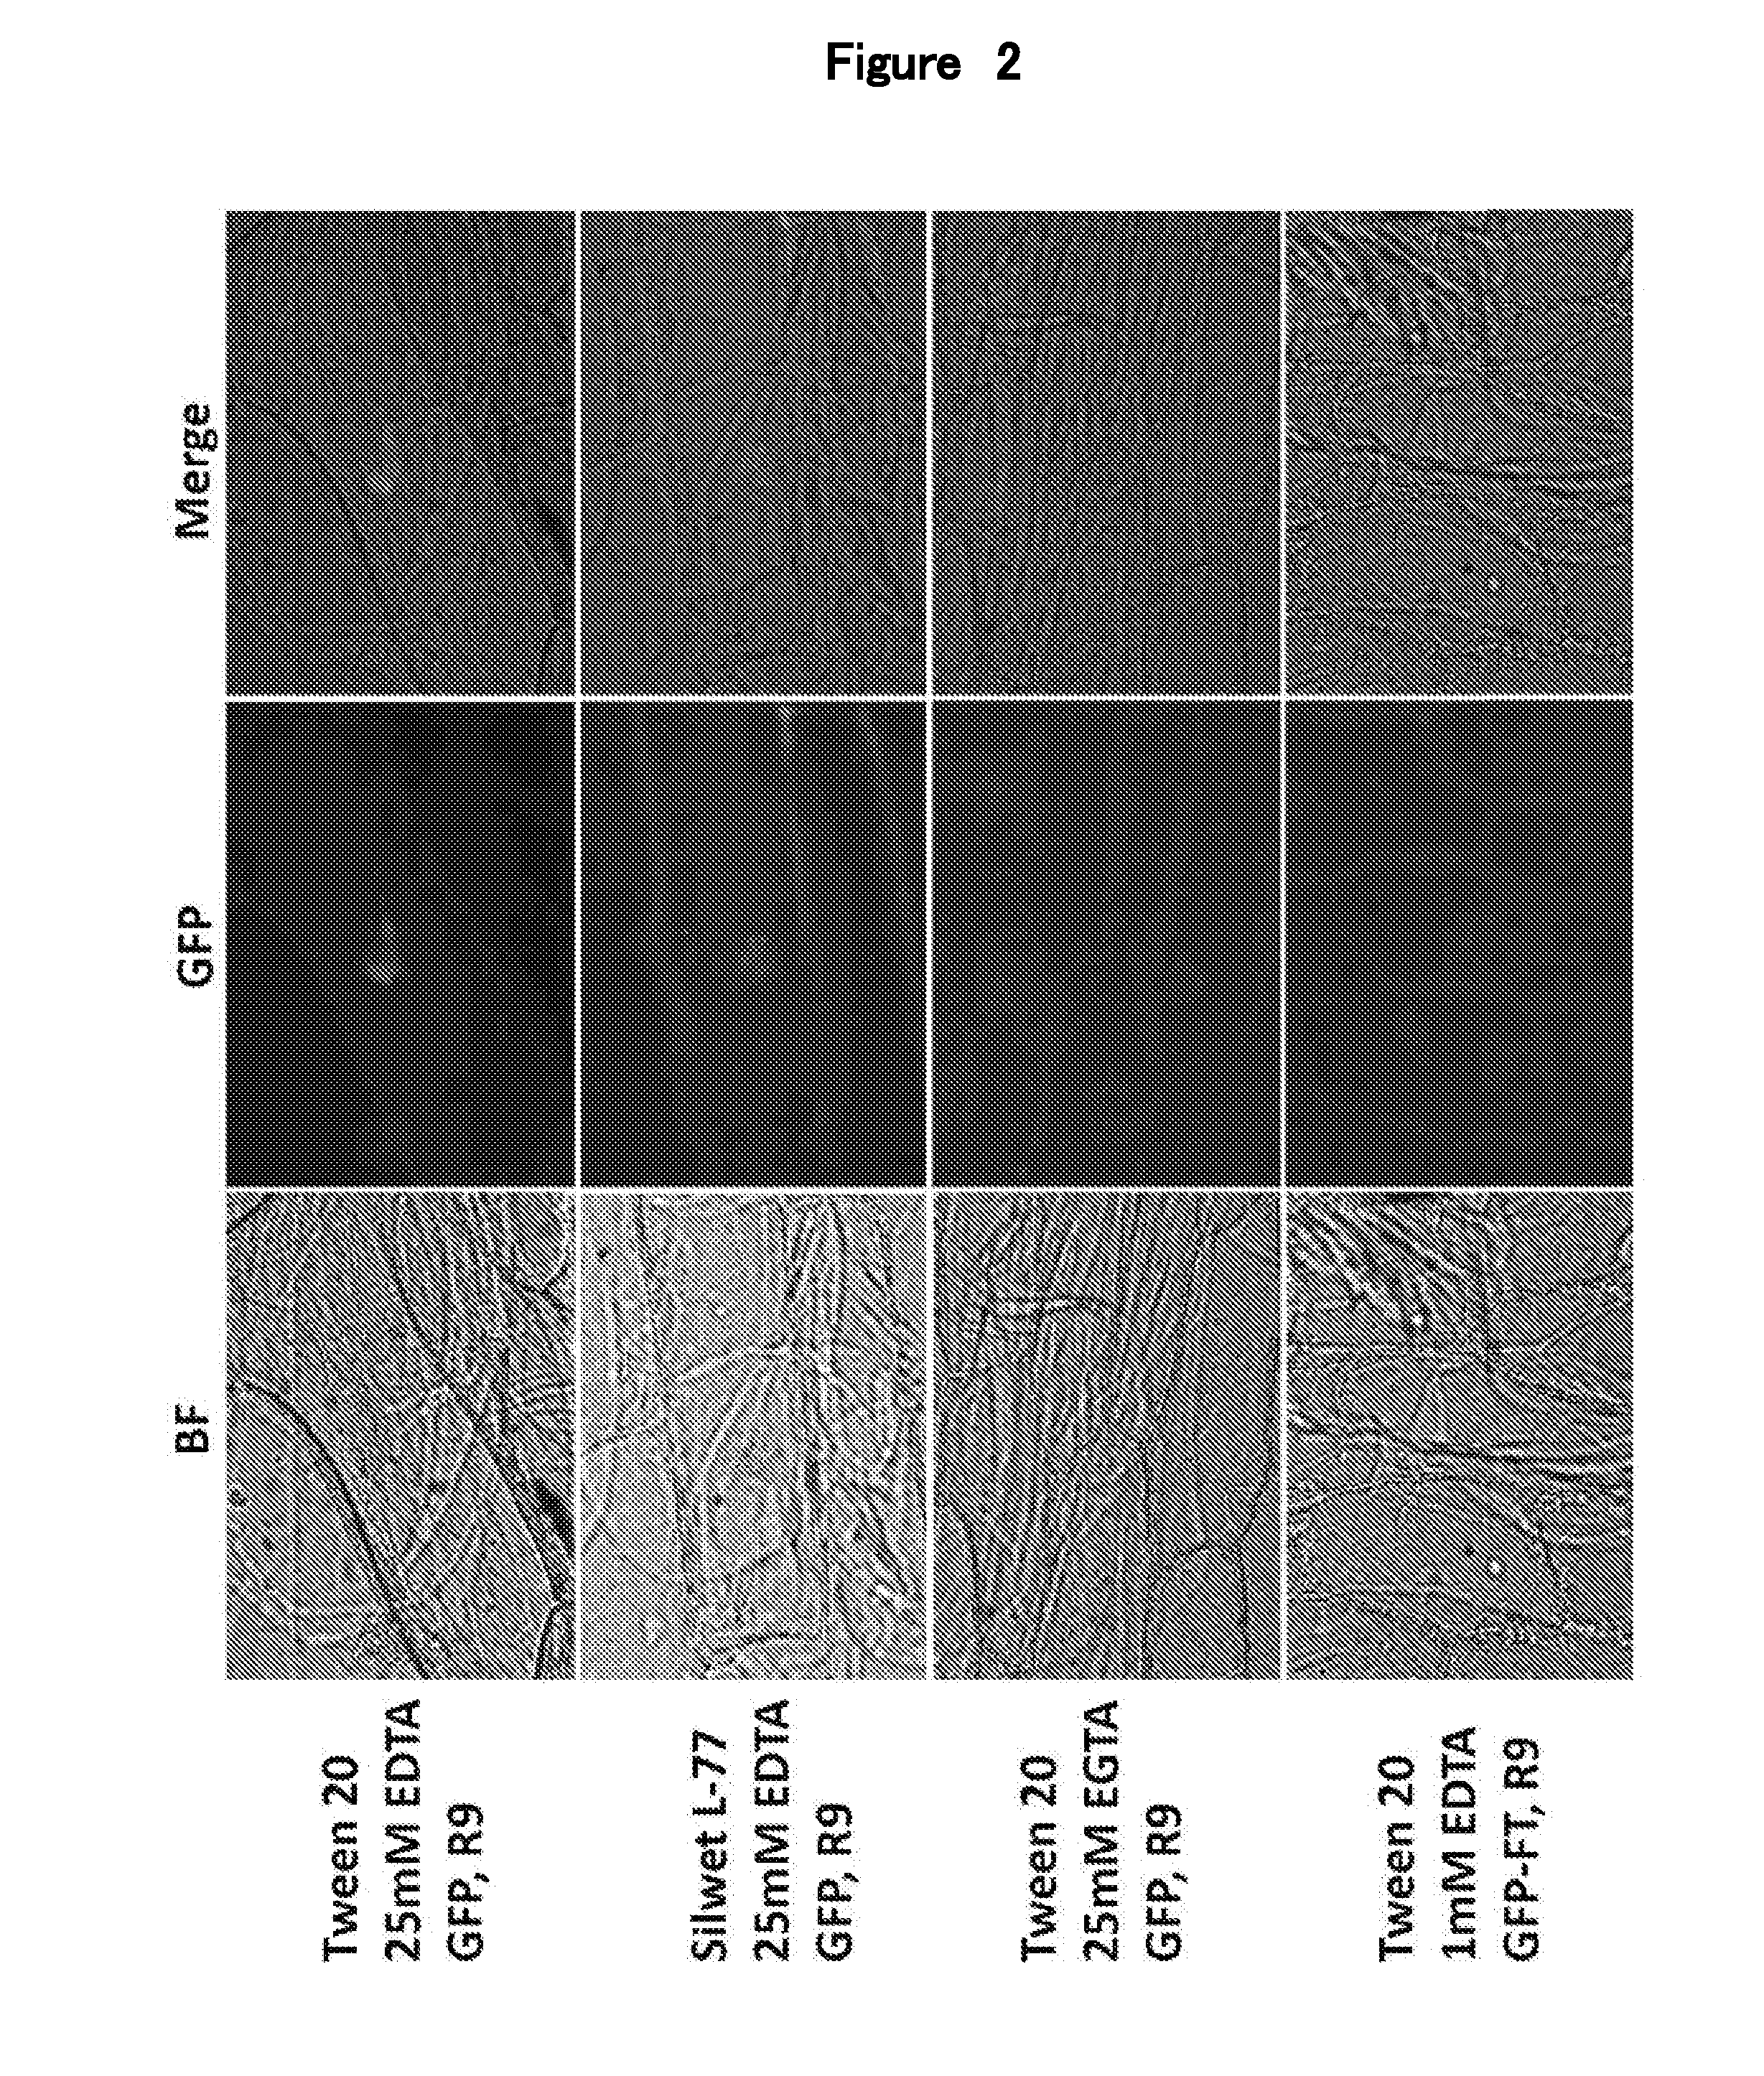 Treating agent for plant cell walls, substance delivery method using treating agent, and substance delivery system